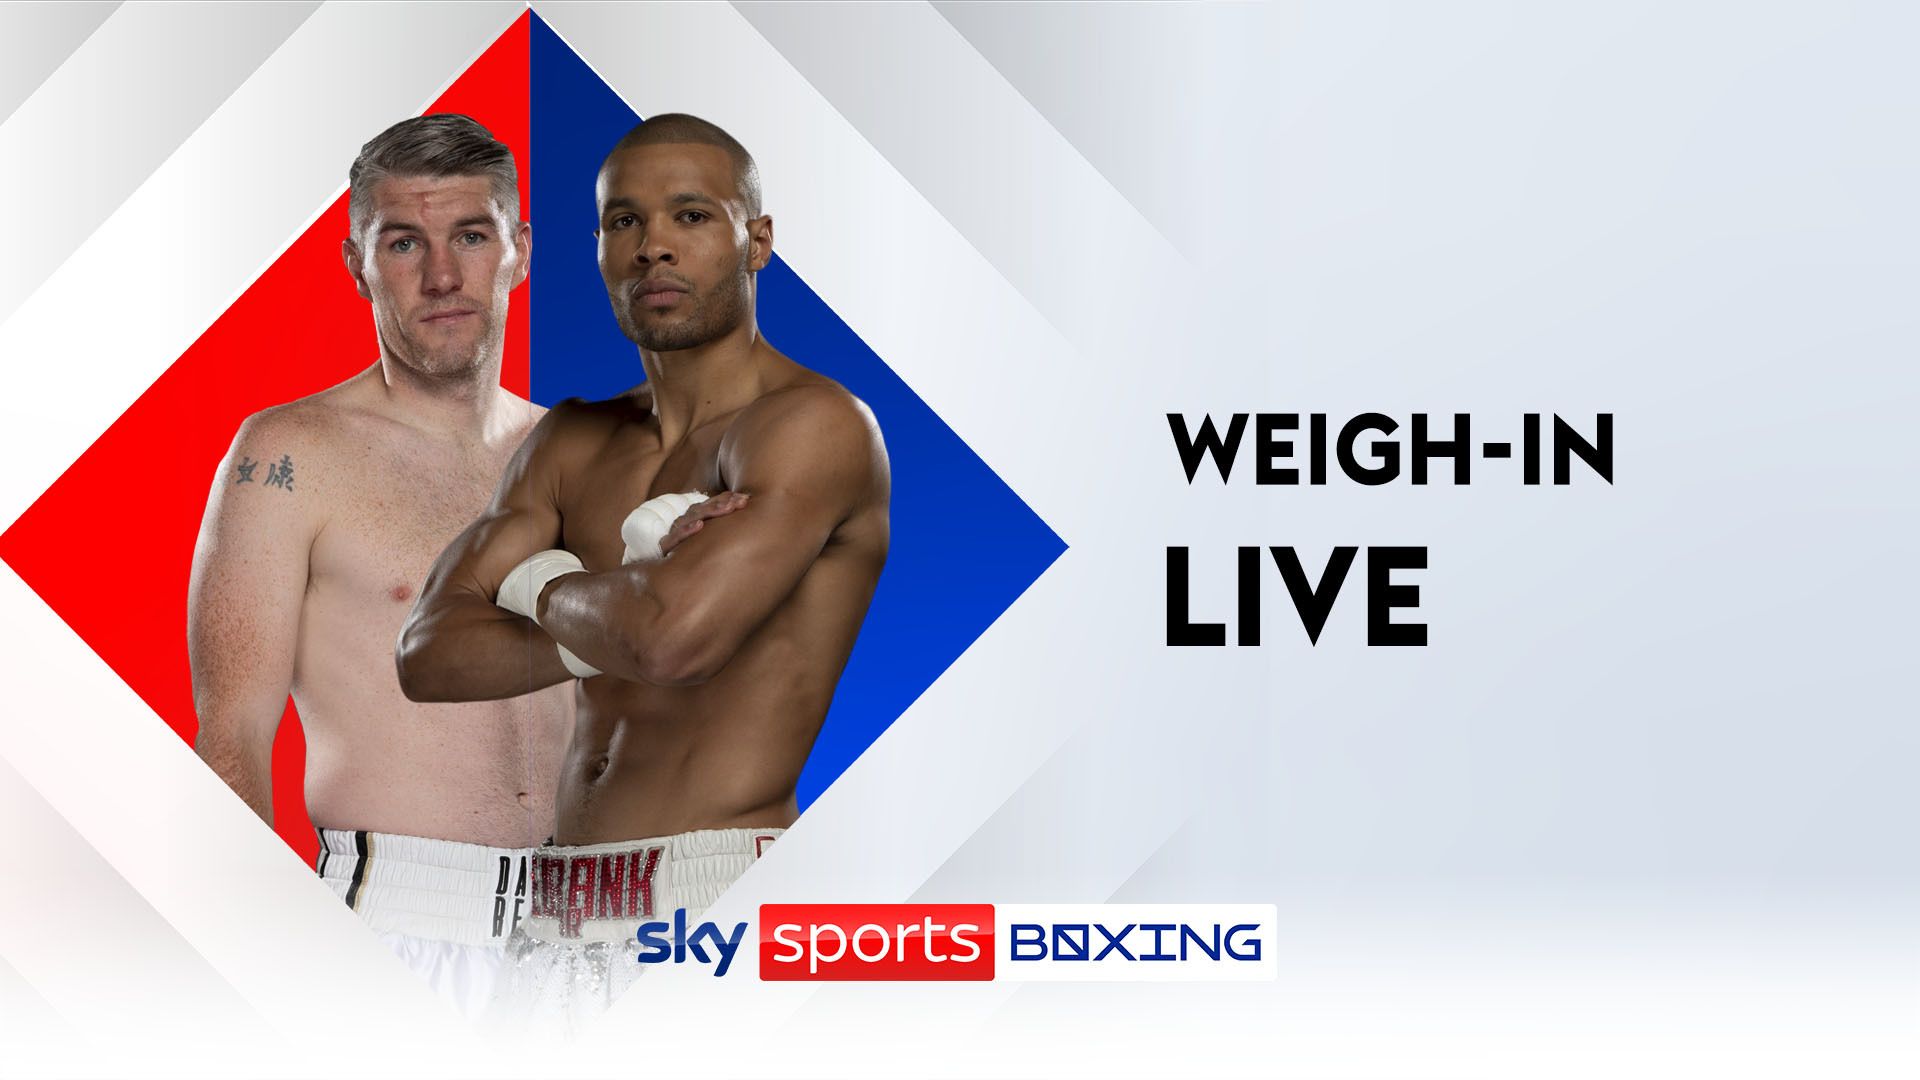 Eubank Jr v Smith: Watch the weigh-in LIVE and have your say!